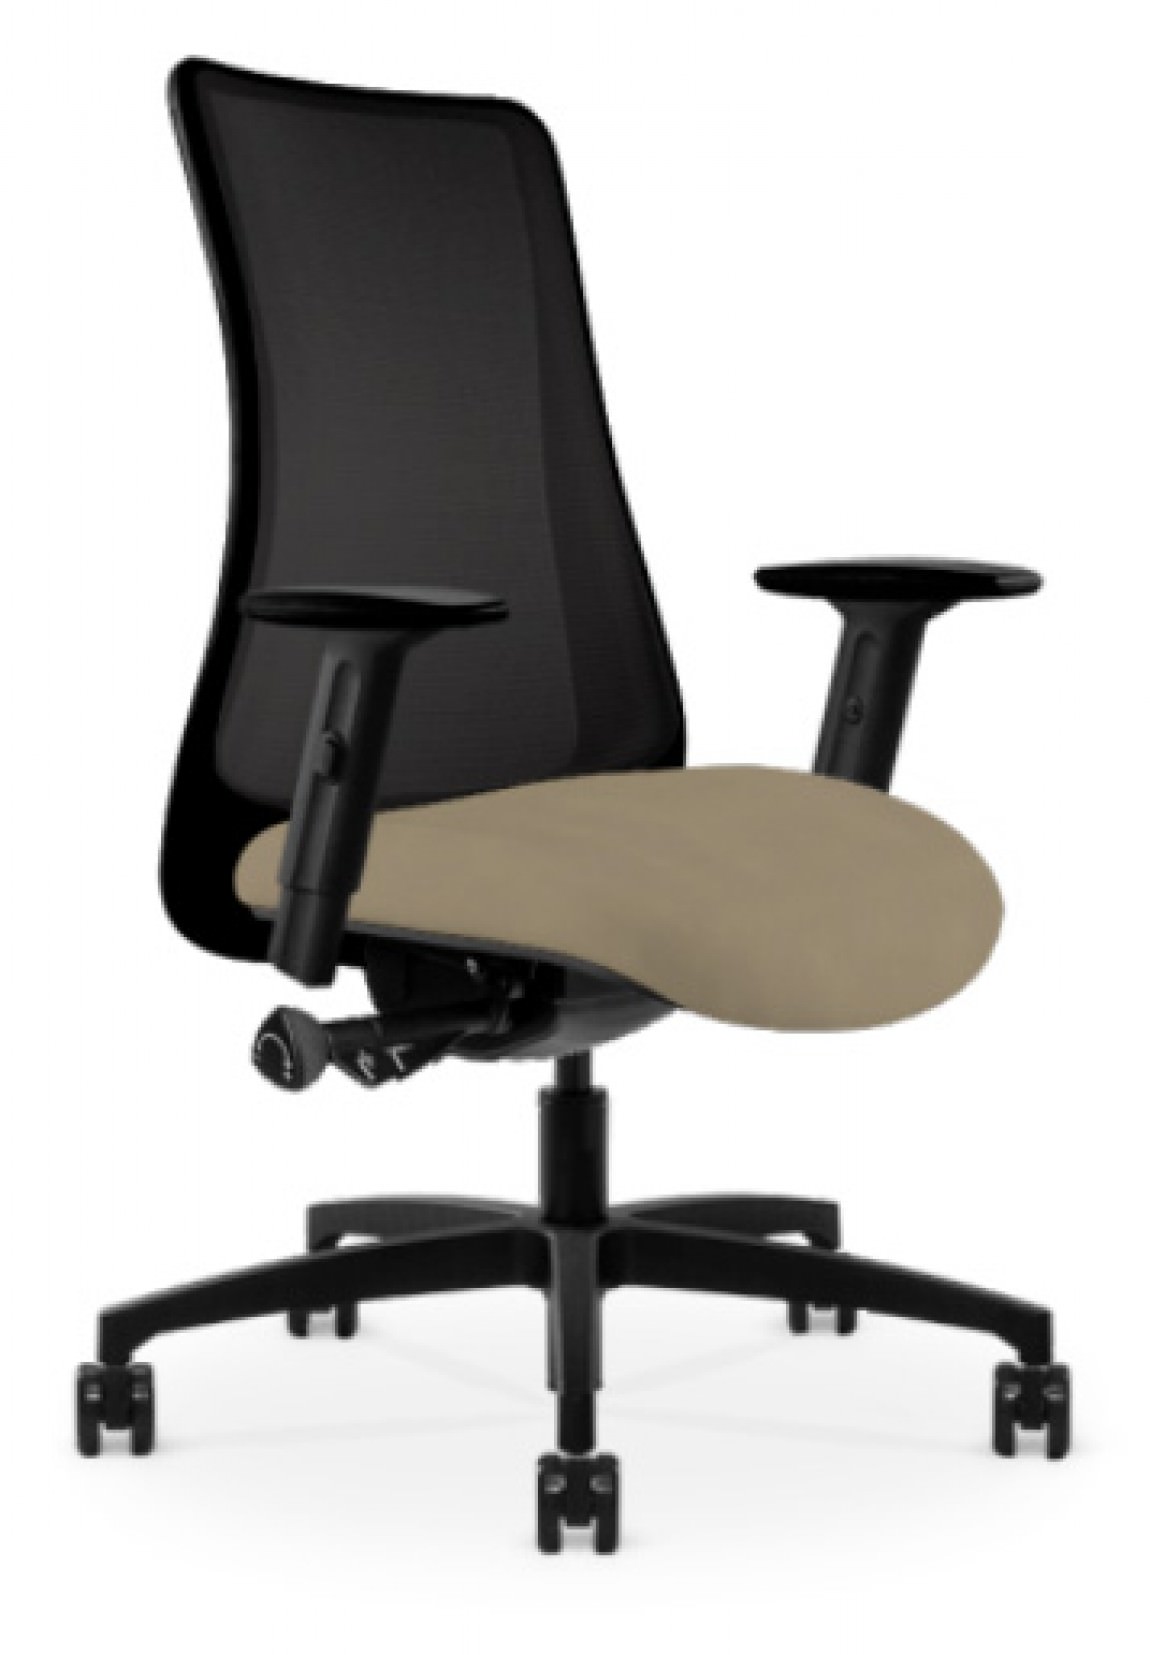 Black Copper Mesh Antimicrobial Office Chair w/ Champagne Seat